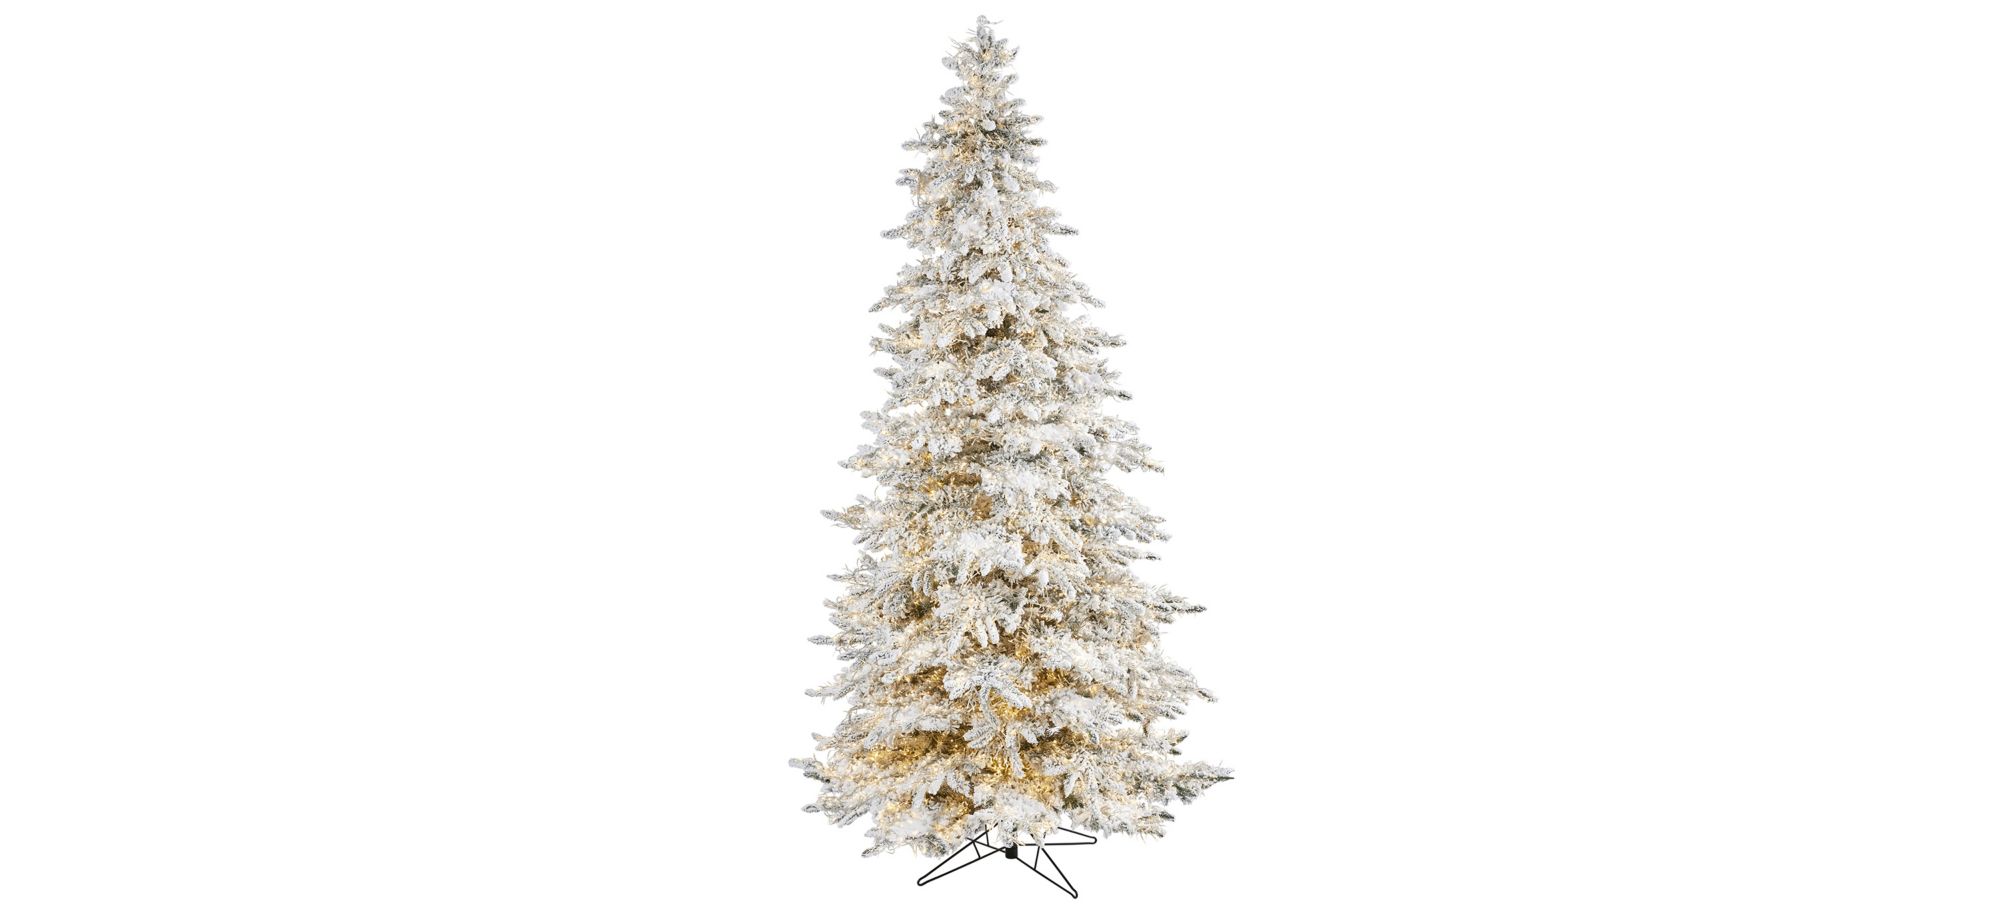 9ft. Pre-Lit Flocked Grand Northern Rocky Fir Artificial Christmas Tree in White by Bellanest